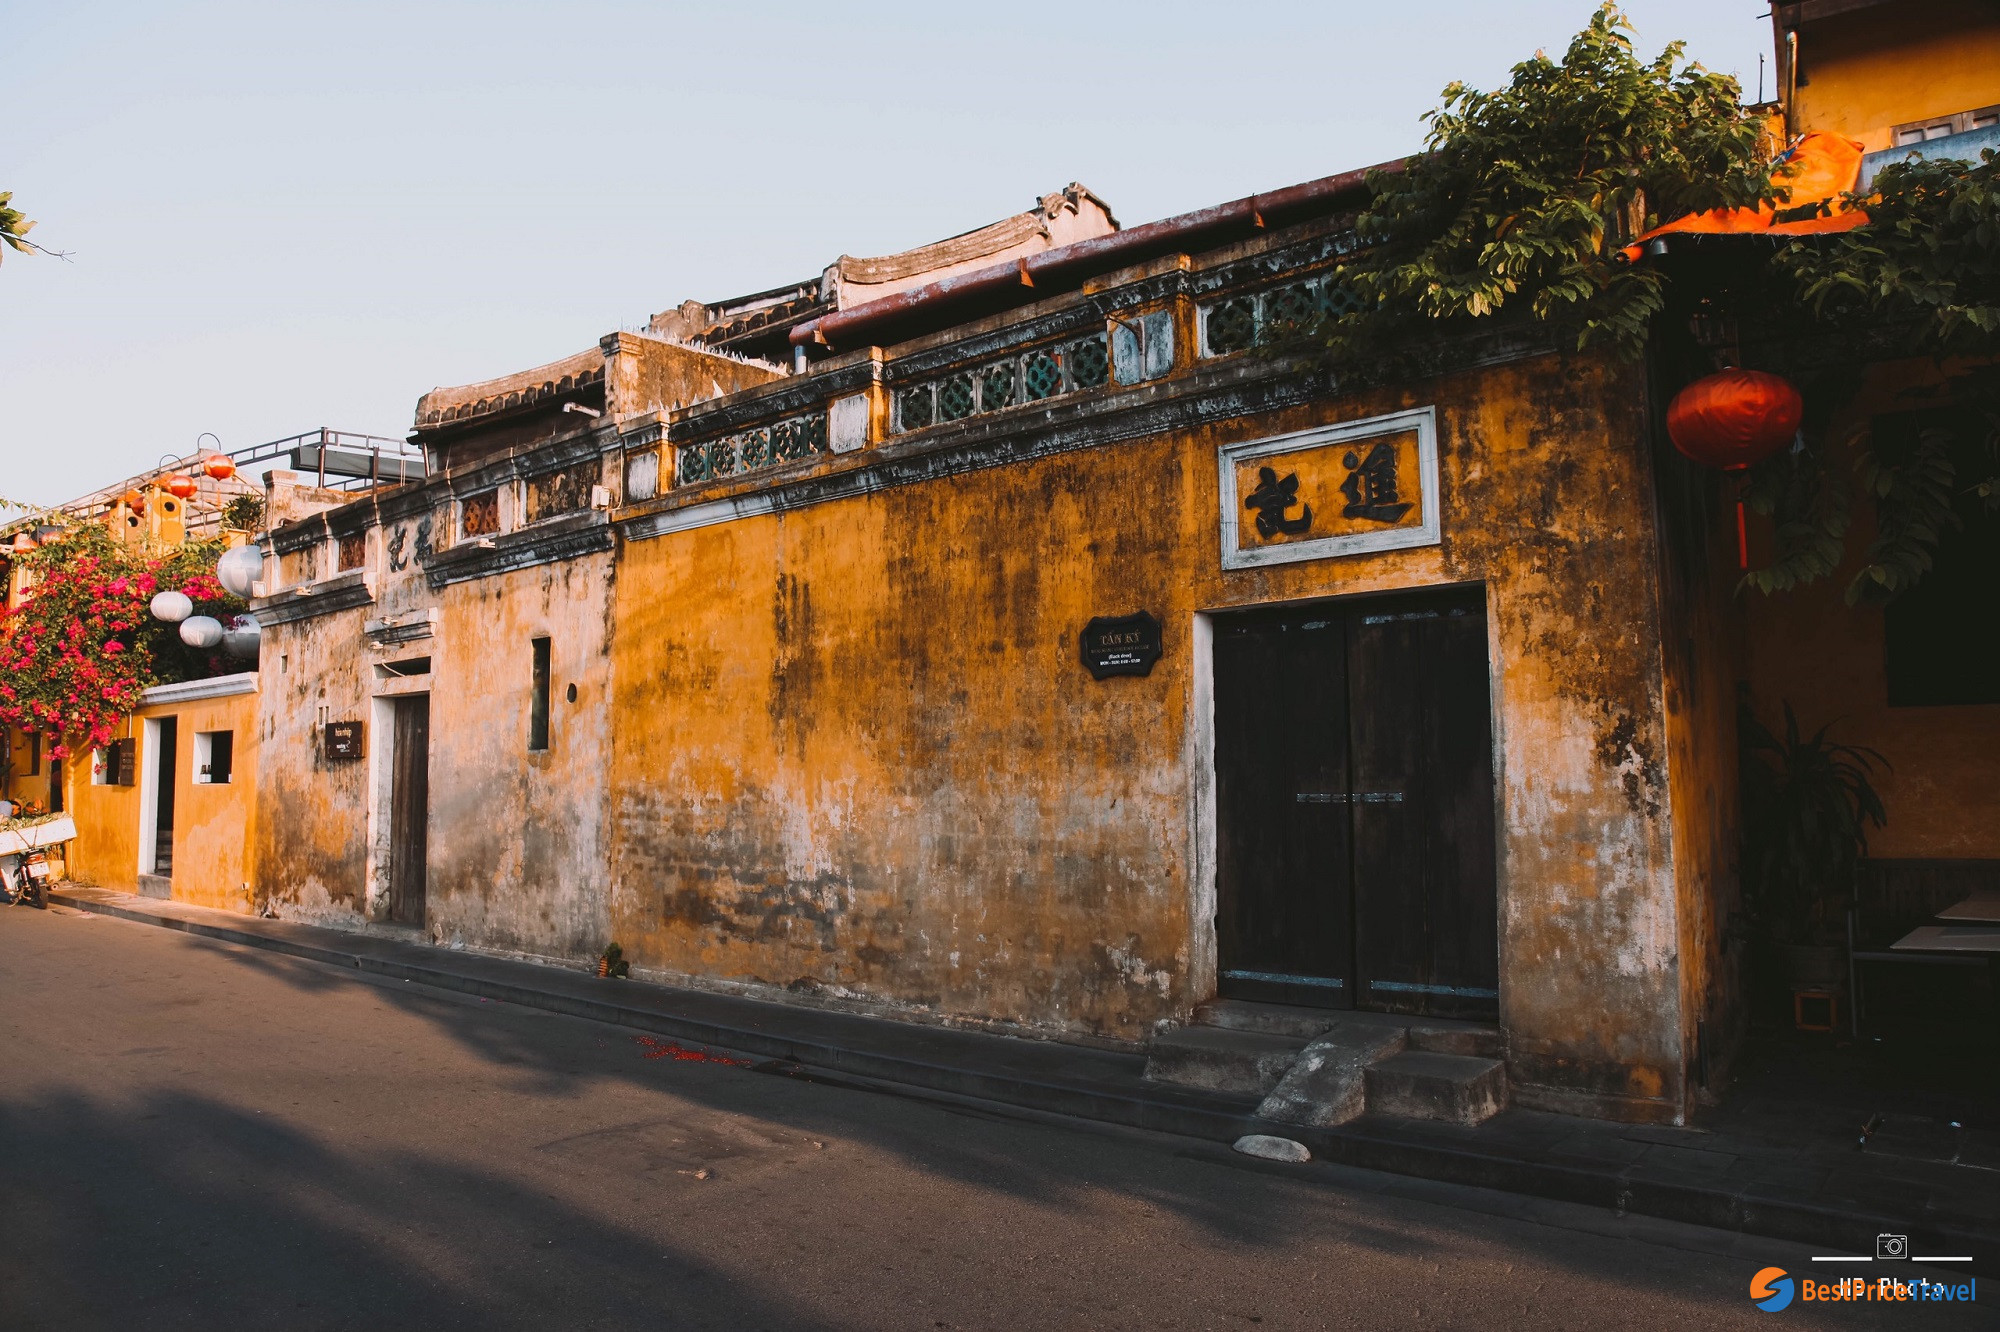 Hoi An Old Town